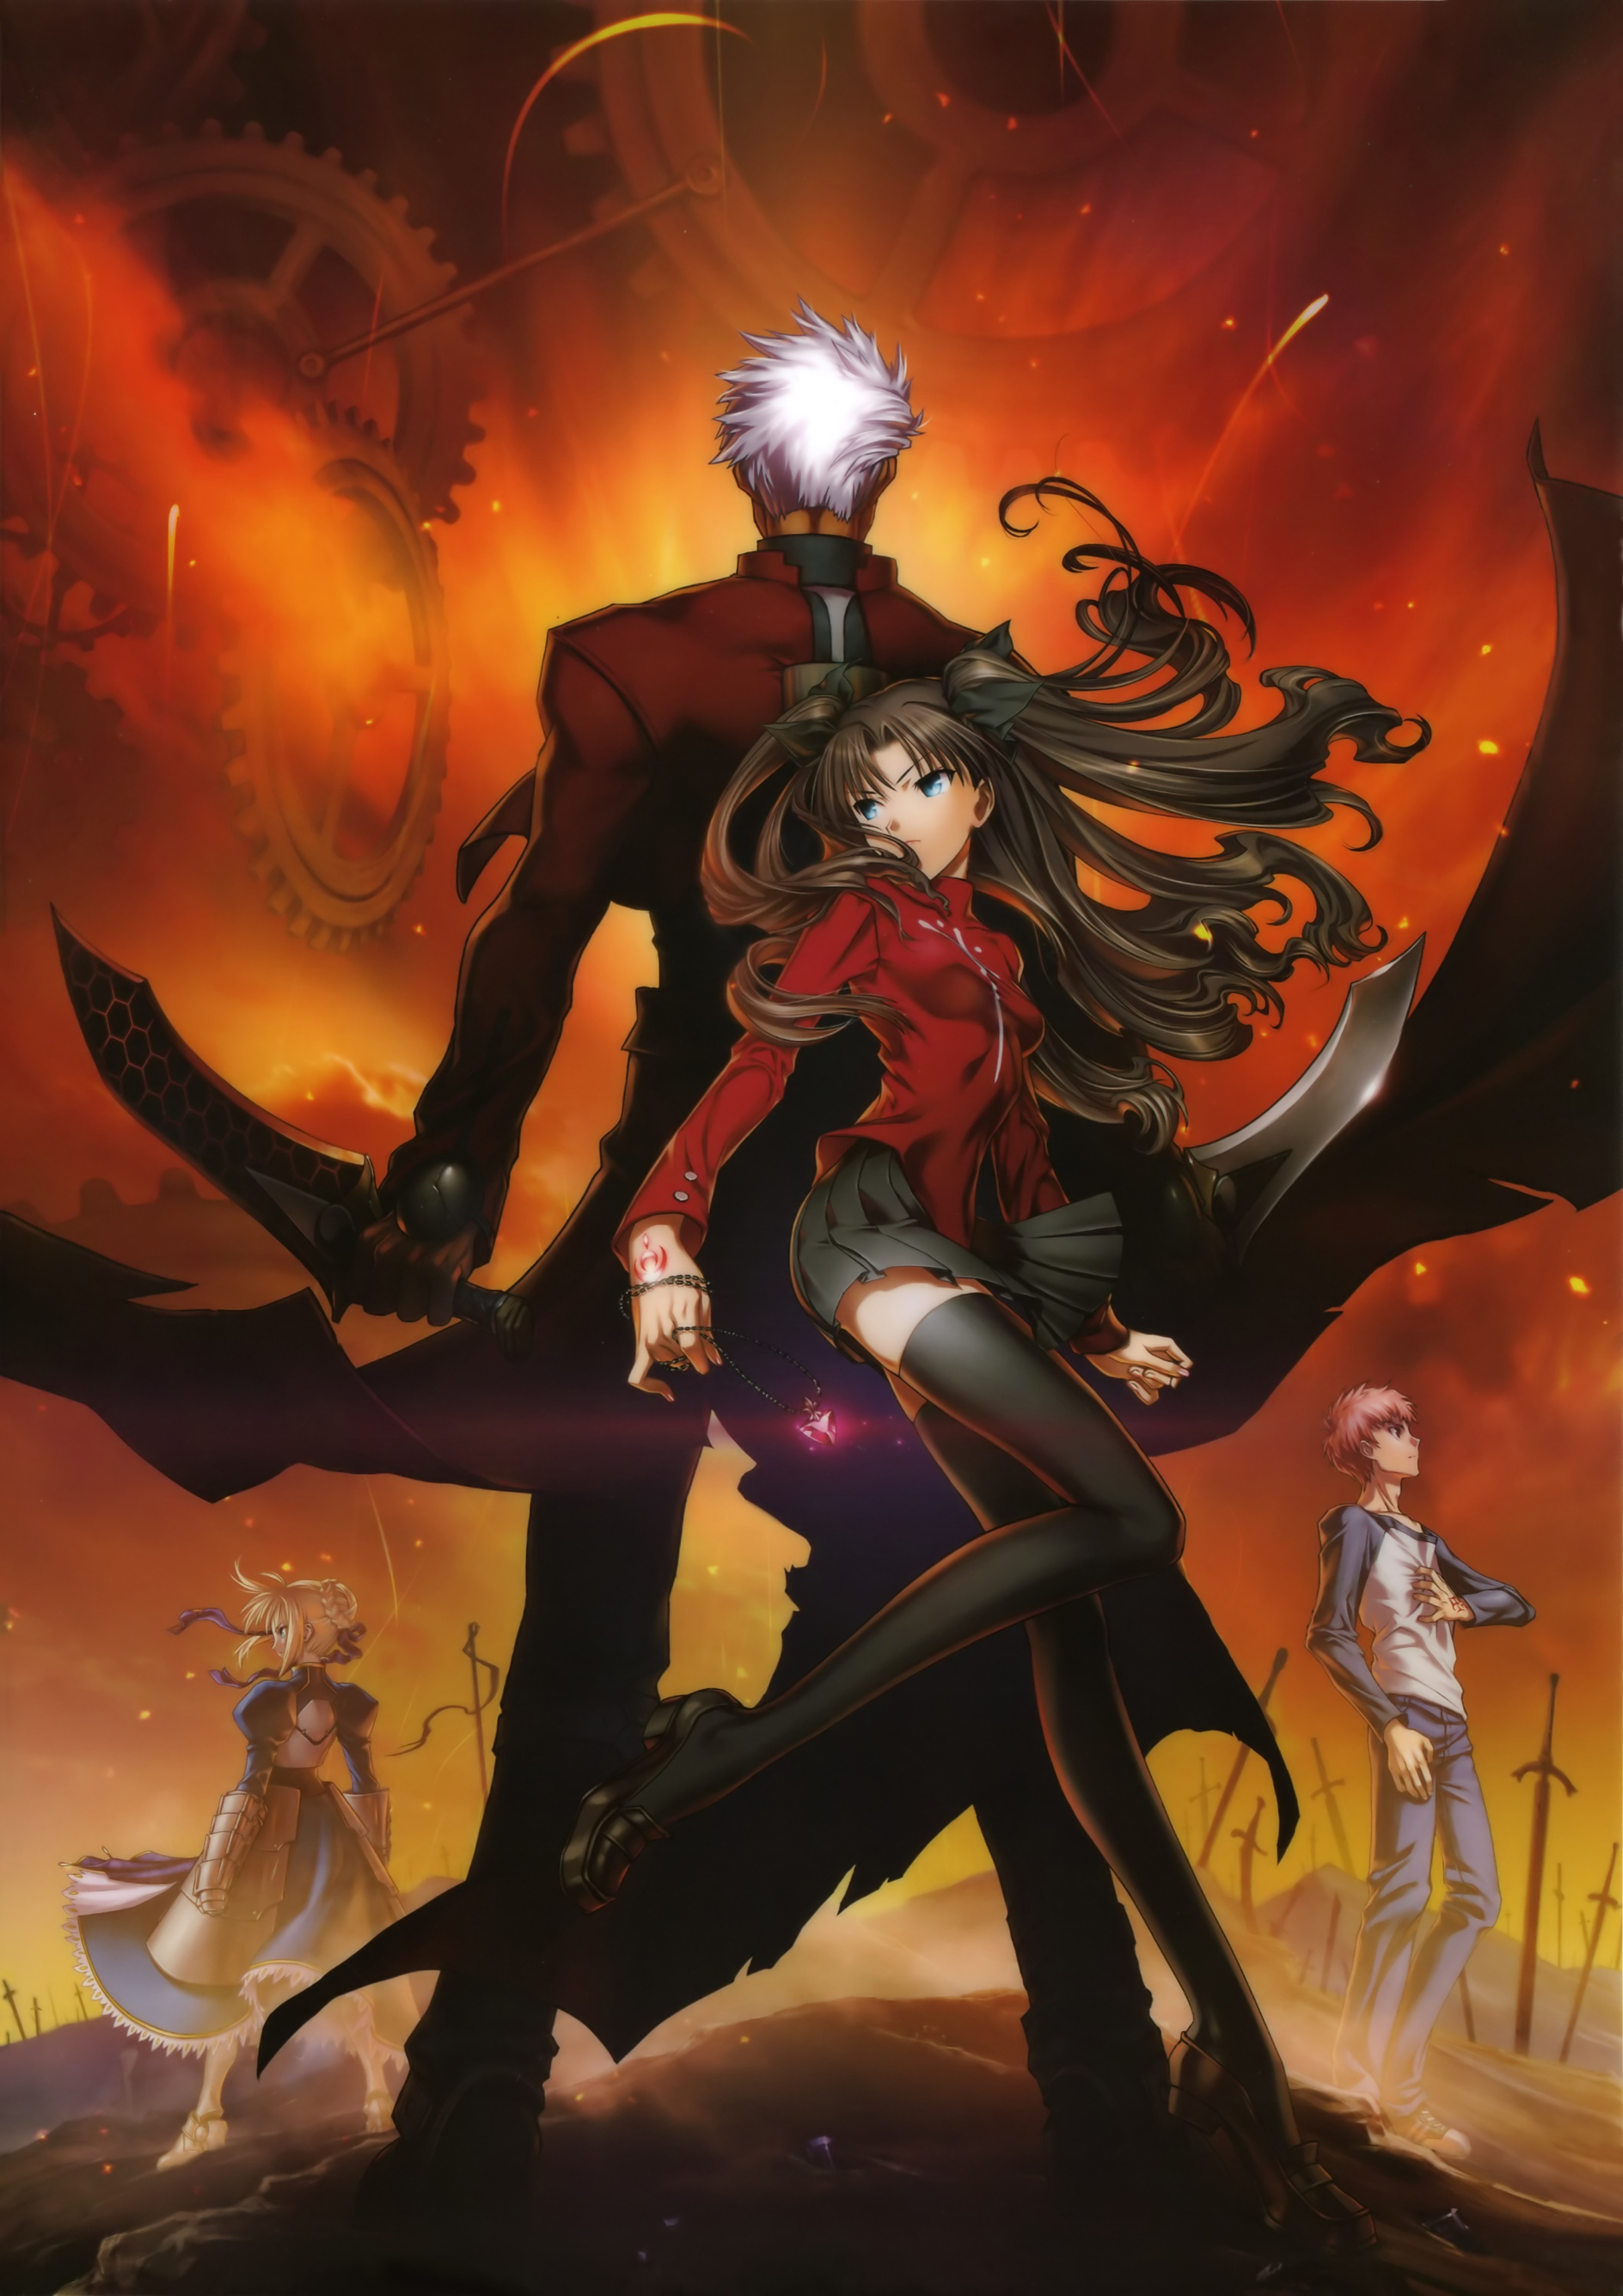 CHARACTER  Fate/stay night [Unlimited Blade Works] USA Official